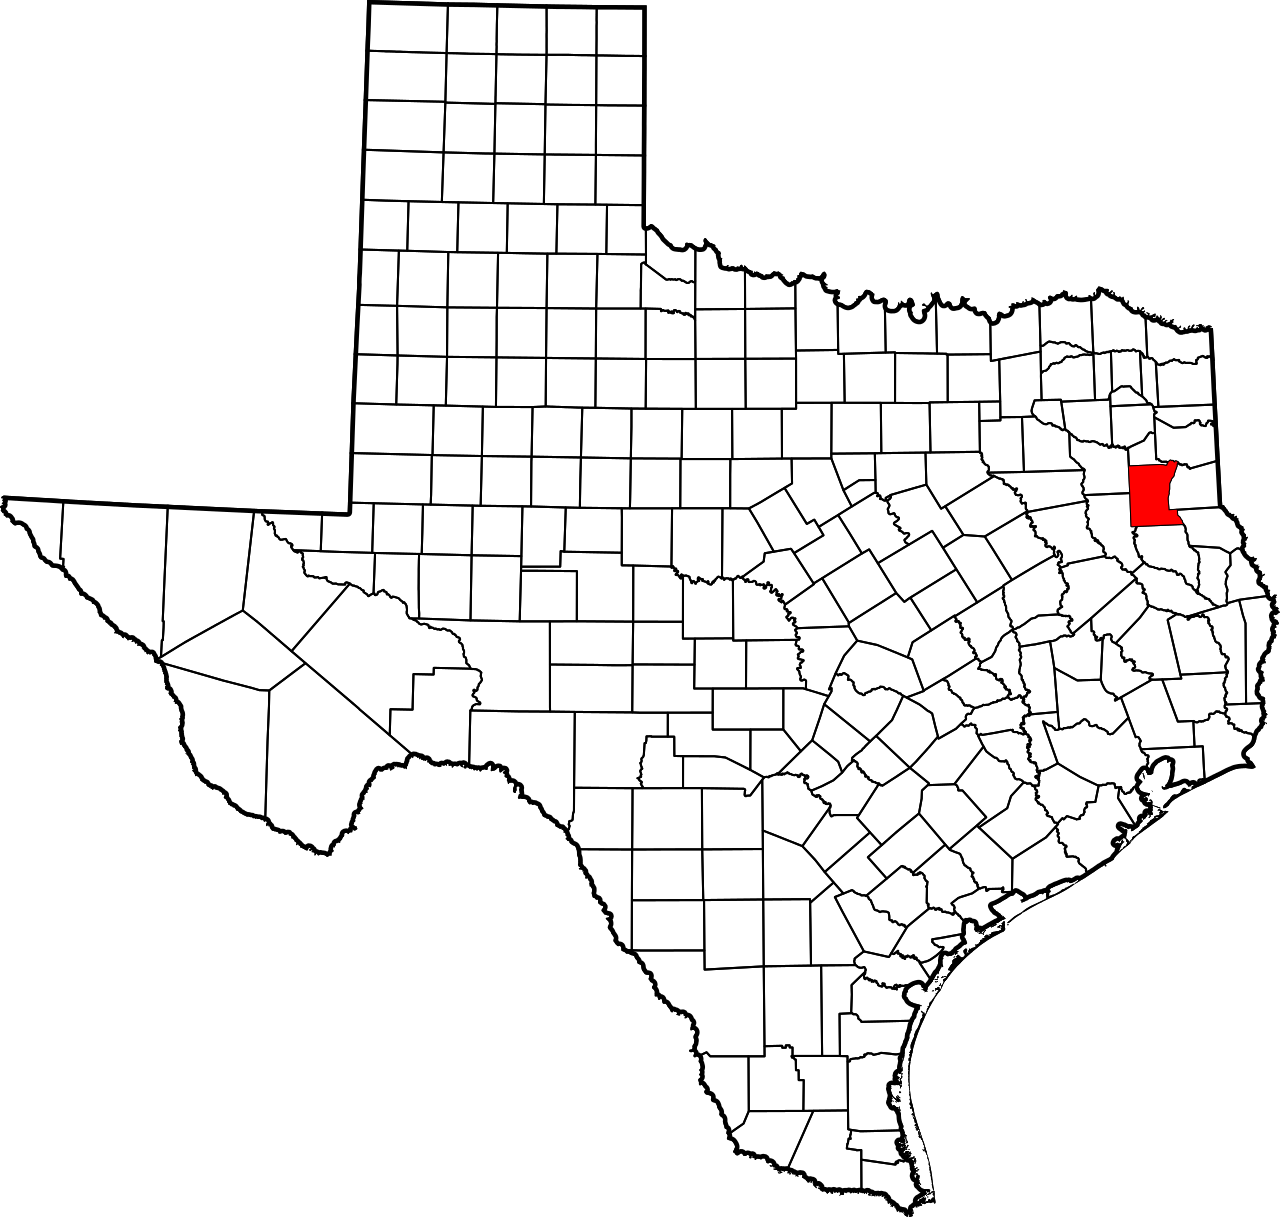 Rusk county in Texas Map image